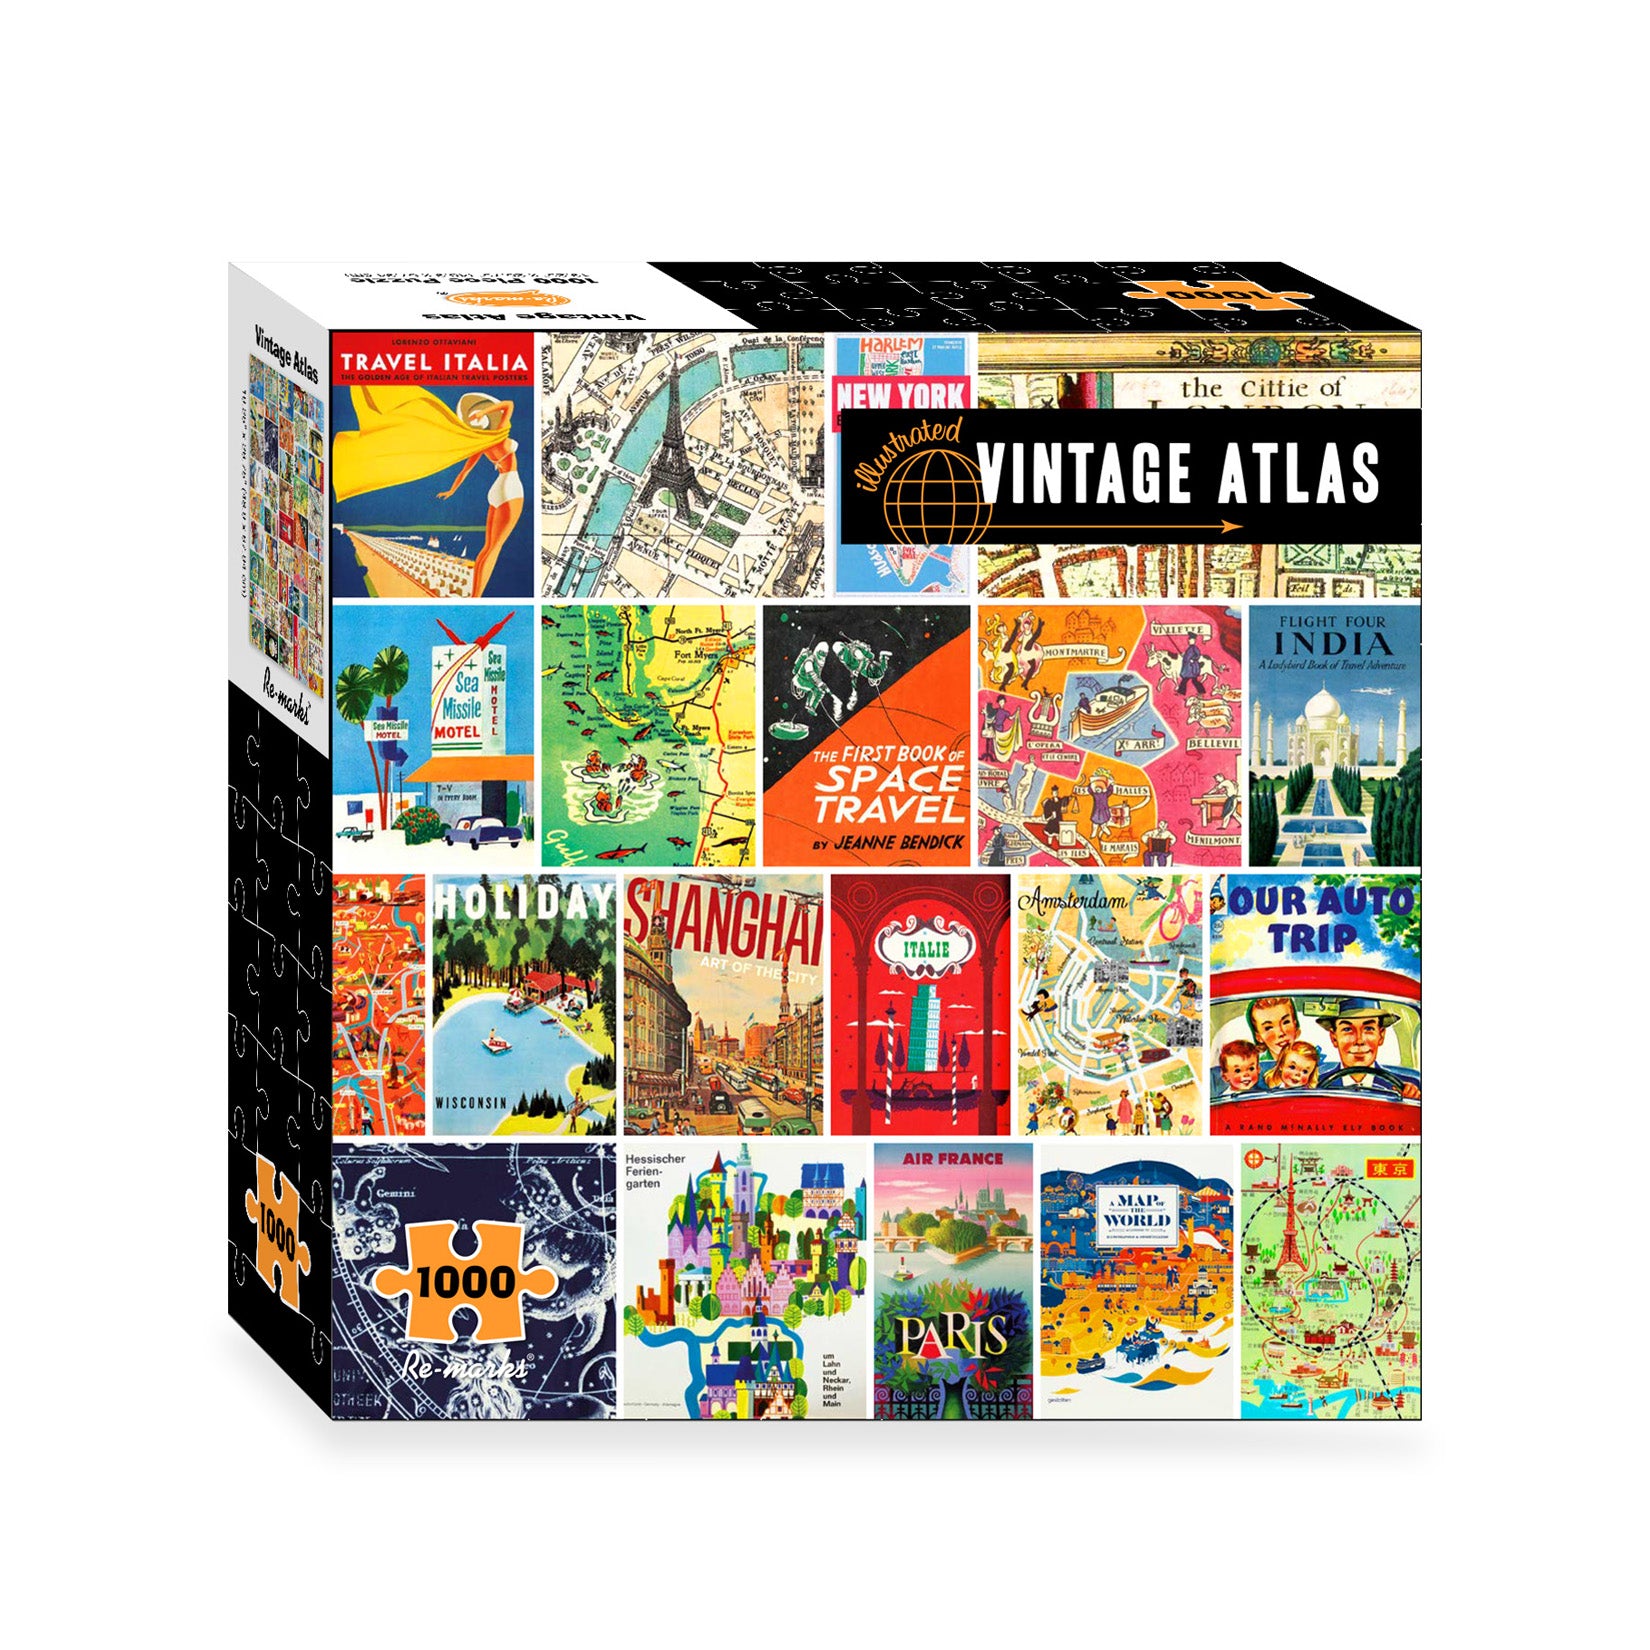 Jigsaw Puzzles: Engaging 1000-Piece High-Quality Puzzles